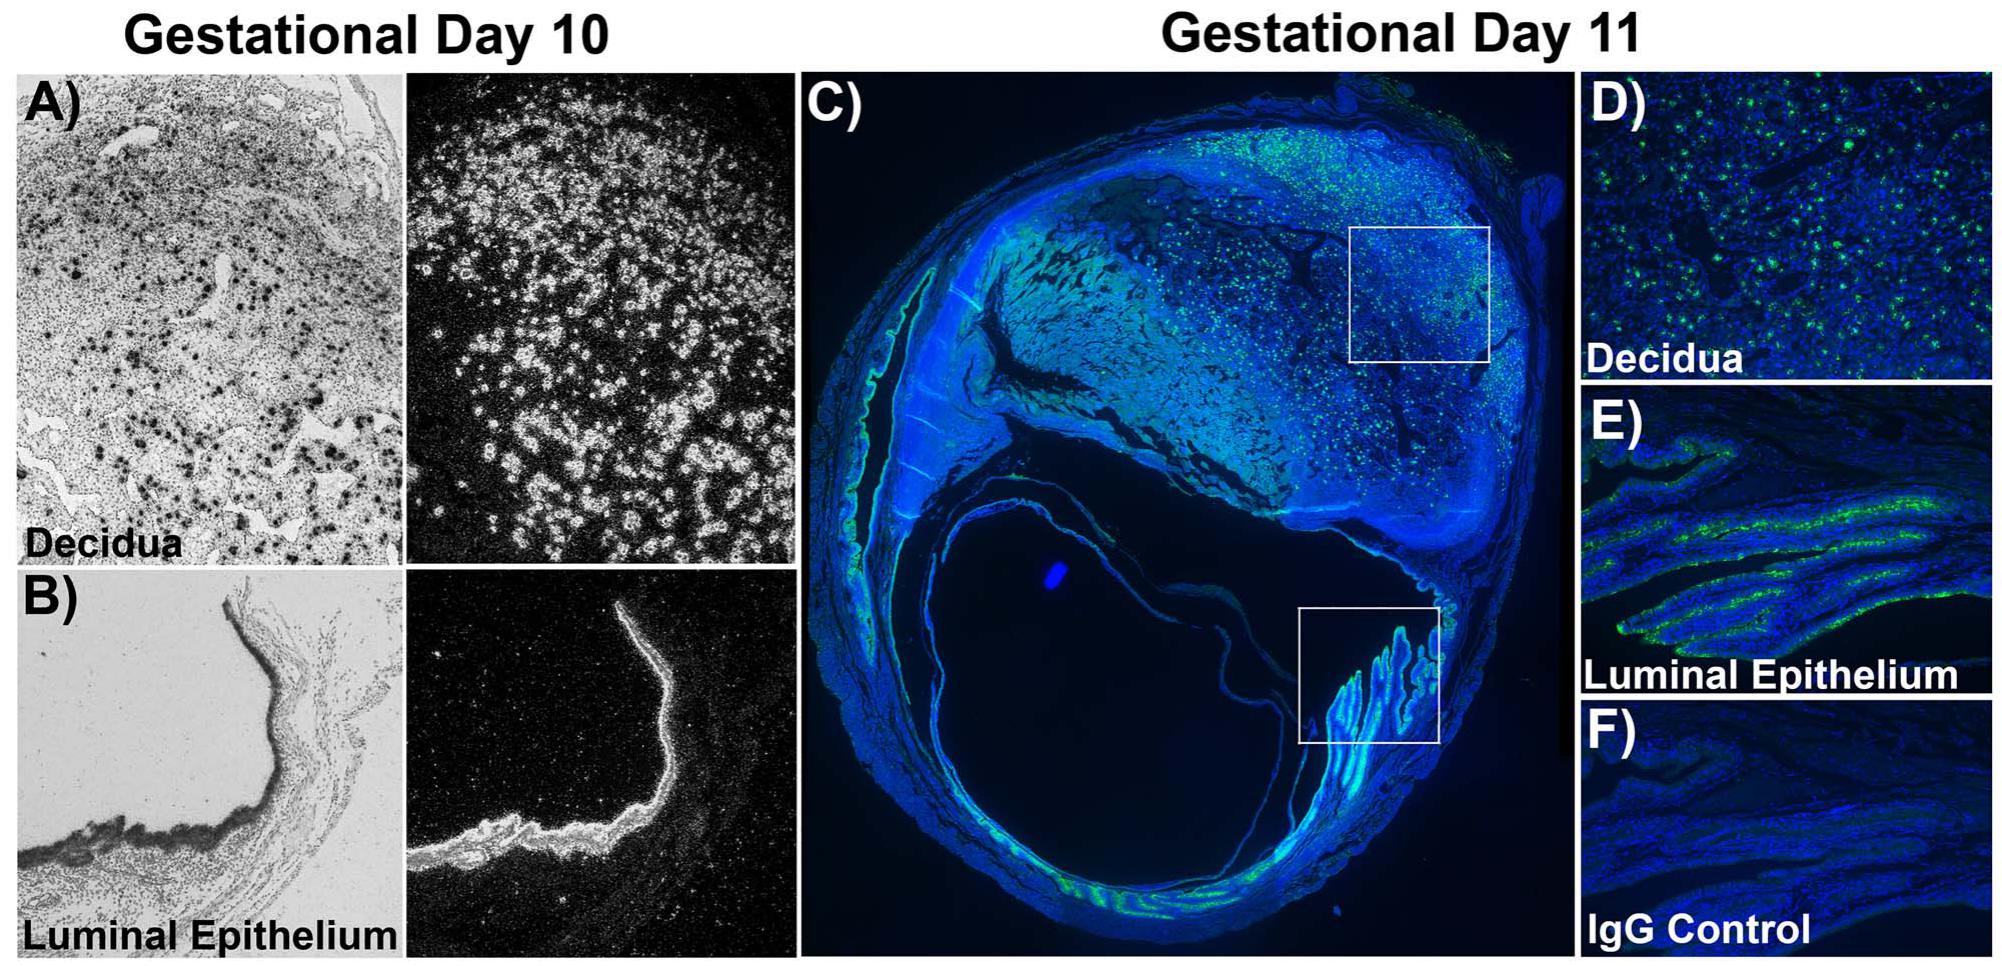 Cell-specific localization of Egam1c mRNA in the mouse placenta at